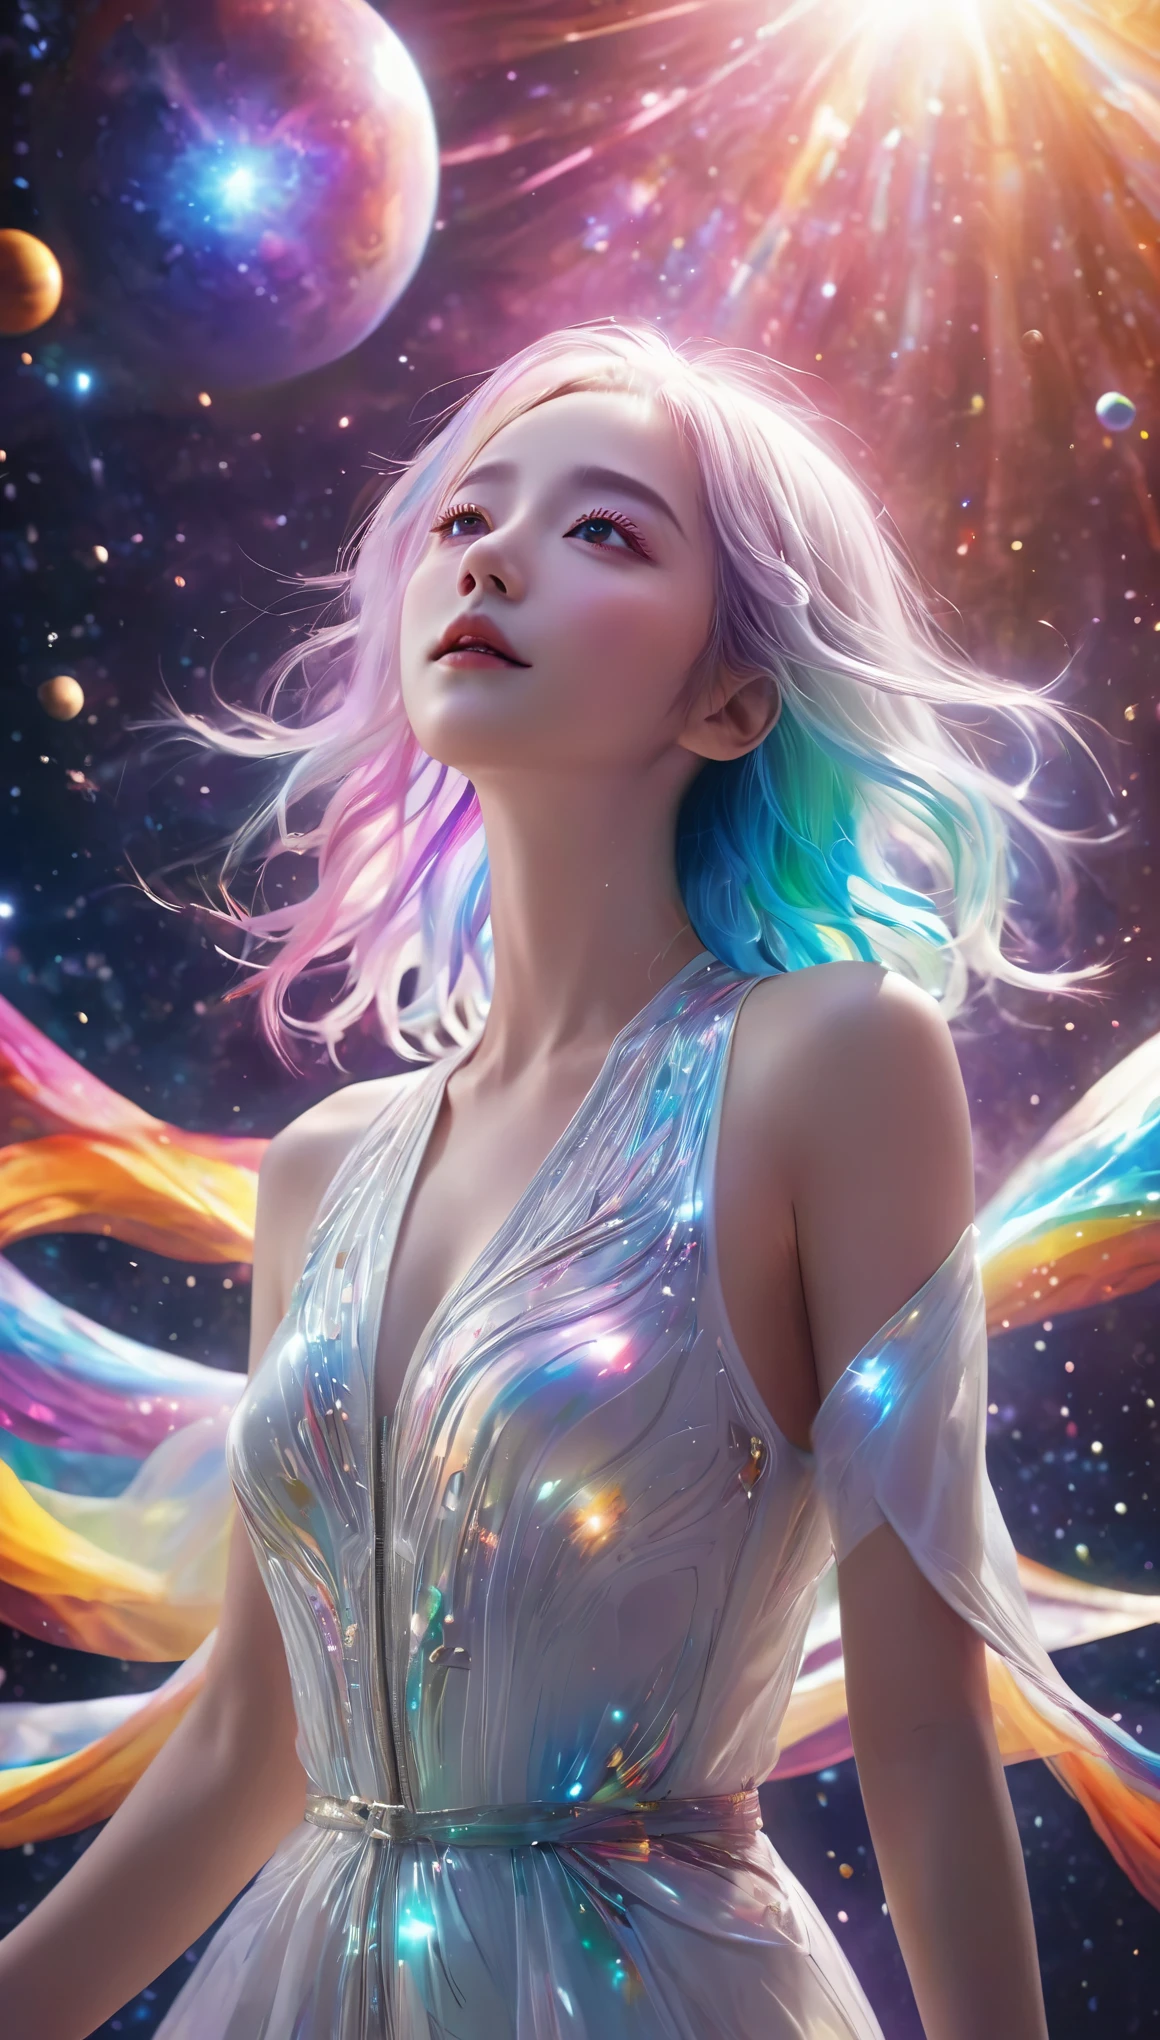 Floating in space、((whole body))、Reach out, highest quality, Highly detailed CG synthesis 8k wallpaper, Cinema lighting, Lens flare, Beautiful eye for detail, White clothes,  Multicolored Hair, Rich and colorful light, particle, 16 years old、girl、Laugh fearlessly、Rainbow Hair、Big Bang Girl,((The edge of the universe can be seen on the lining))、dark matter、energy、Retro and psychedelic、Create miracles with a single photon、From Blink to Quasar、It&#39;s too bright to keep looking、The Super Burst is what draws you in